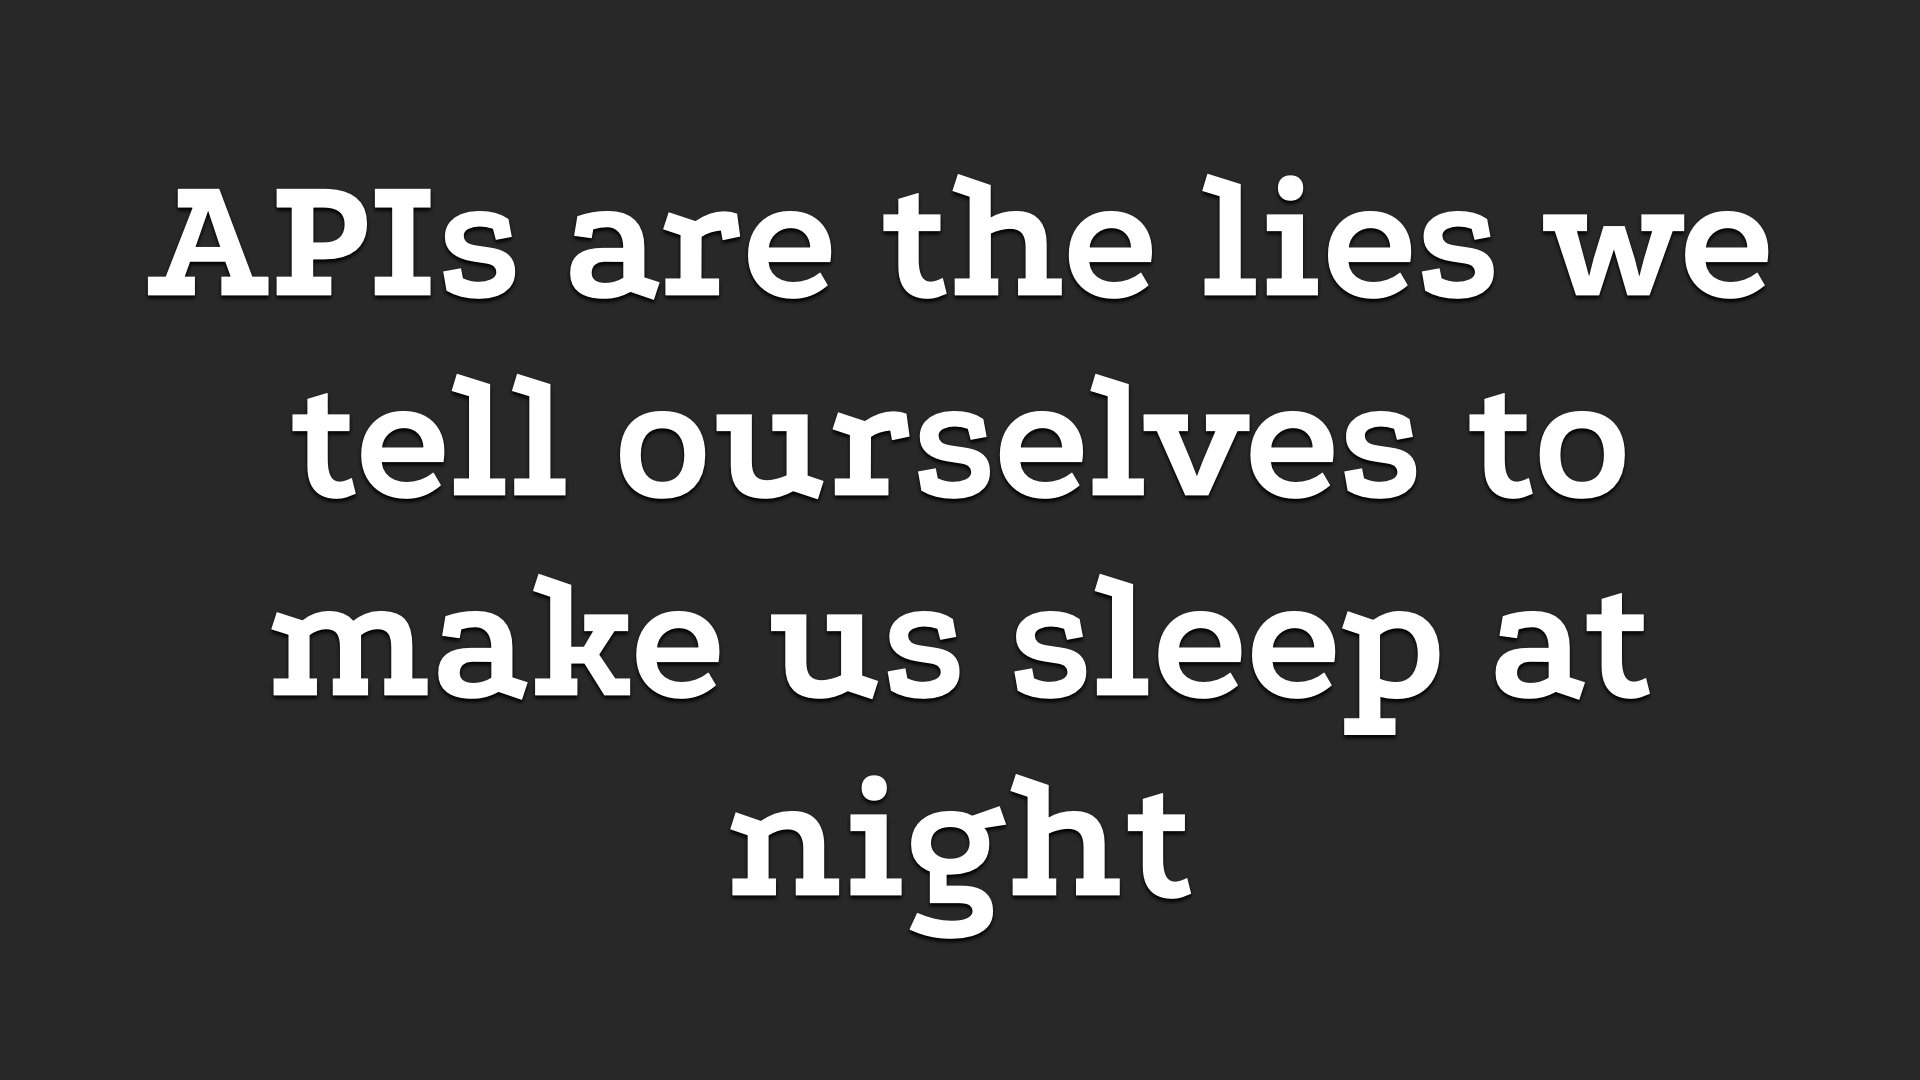 Text in giant letters: 'APIs are the lies we tell ourselves to make us sleep better at night'